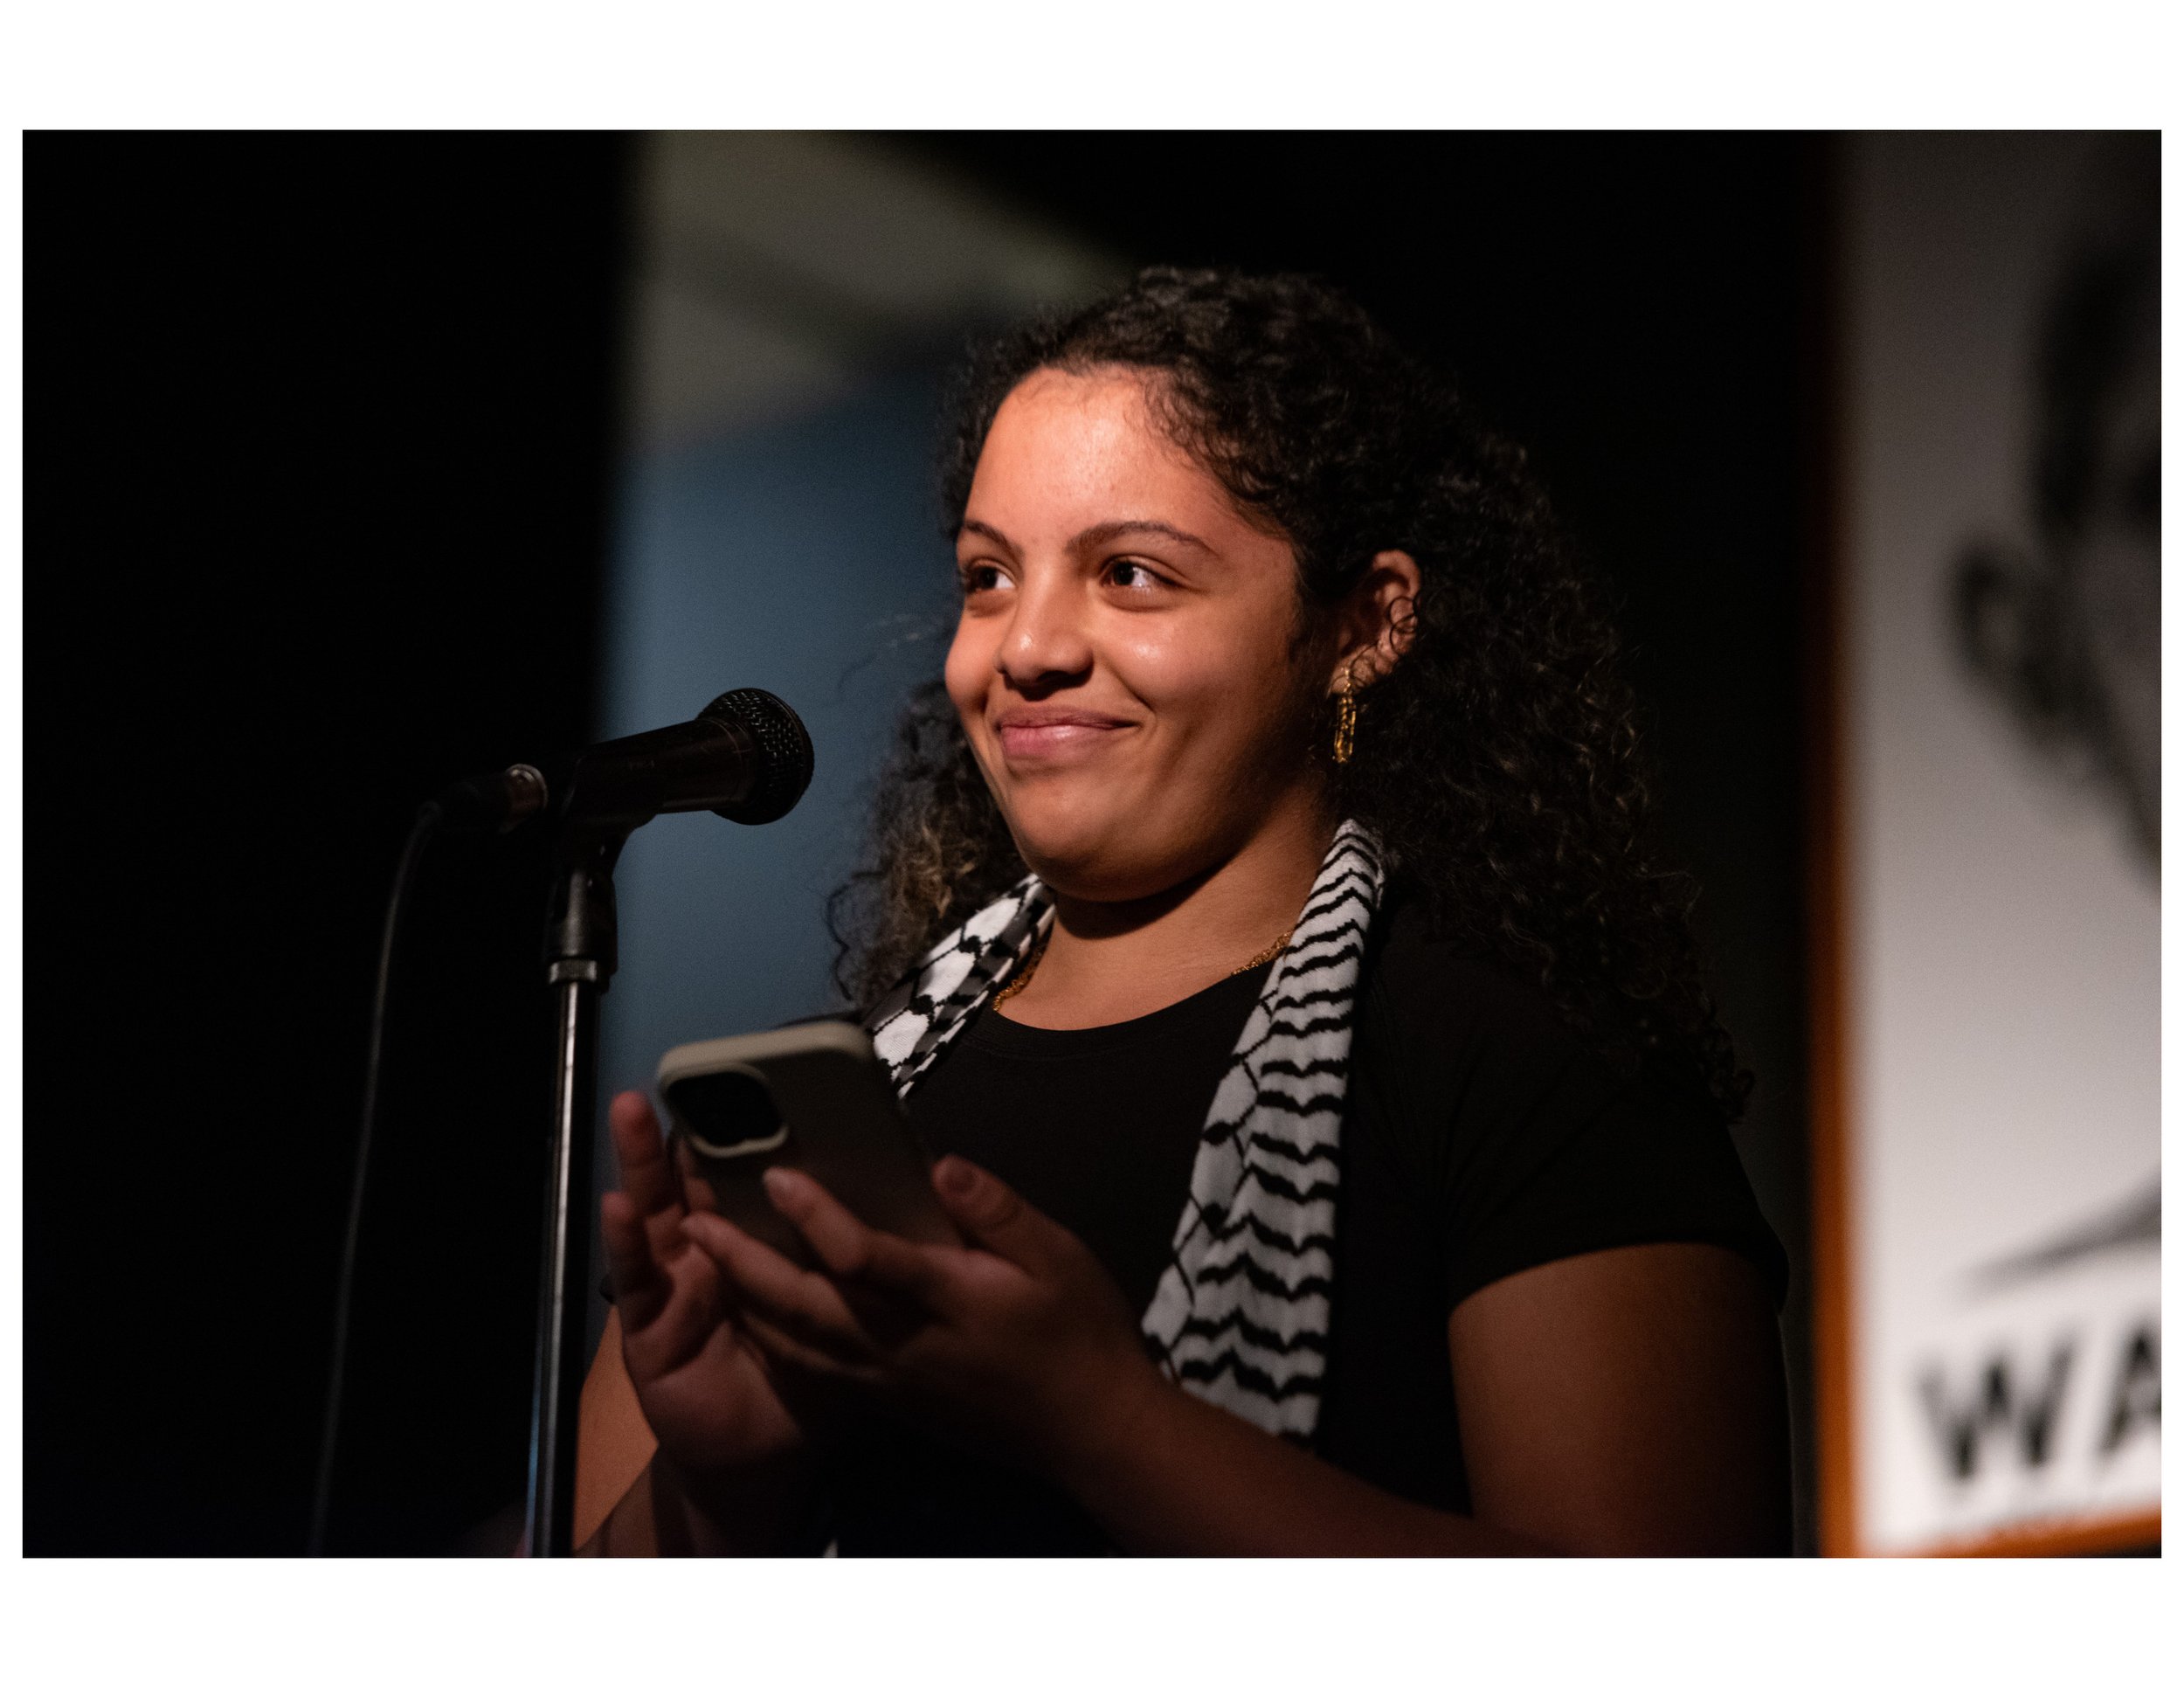   Youth Poet Laila performs original poem at an open mic event hosted by Words Beats &amp; Life Inc. at Busboys and Poets in Washington, DC. Photographer/Victoria Ford  